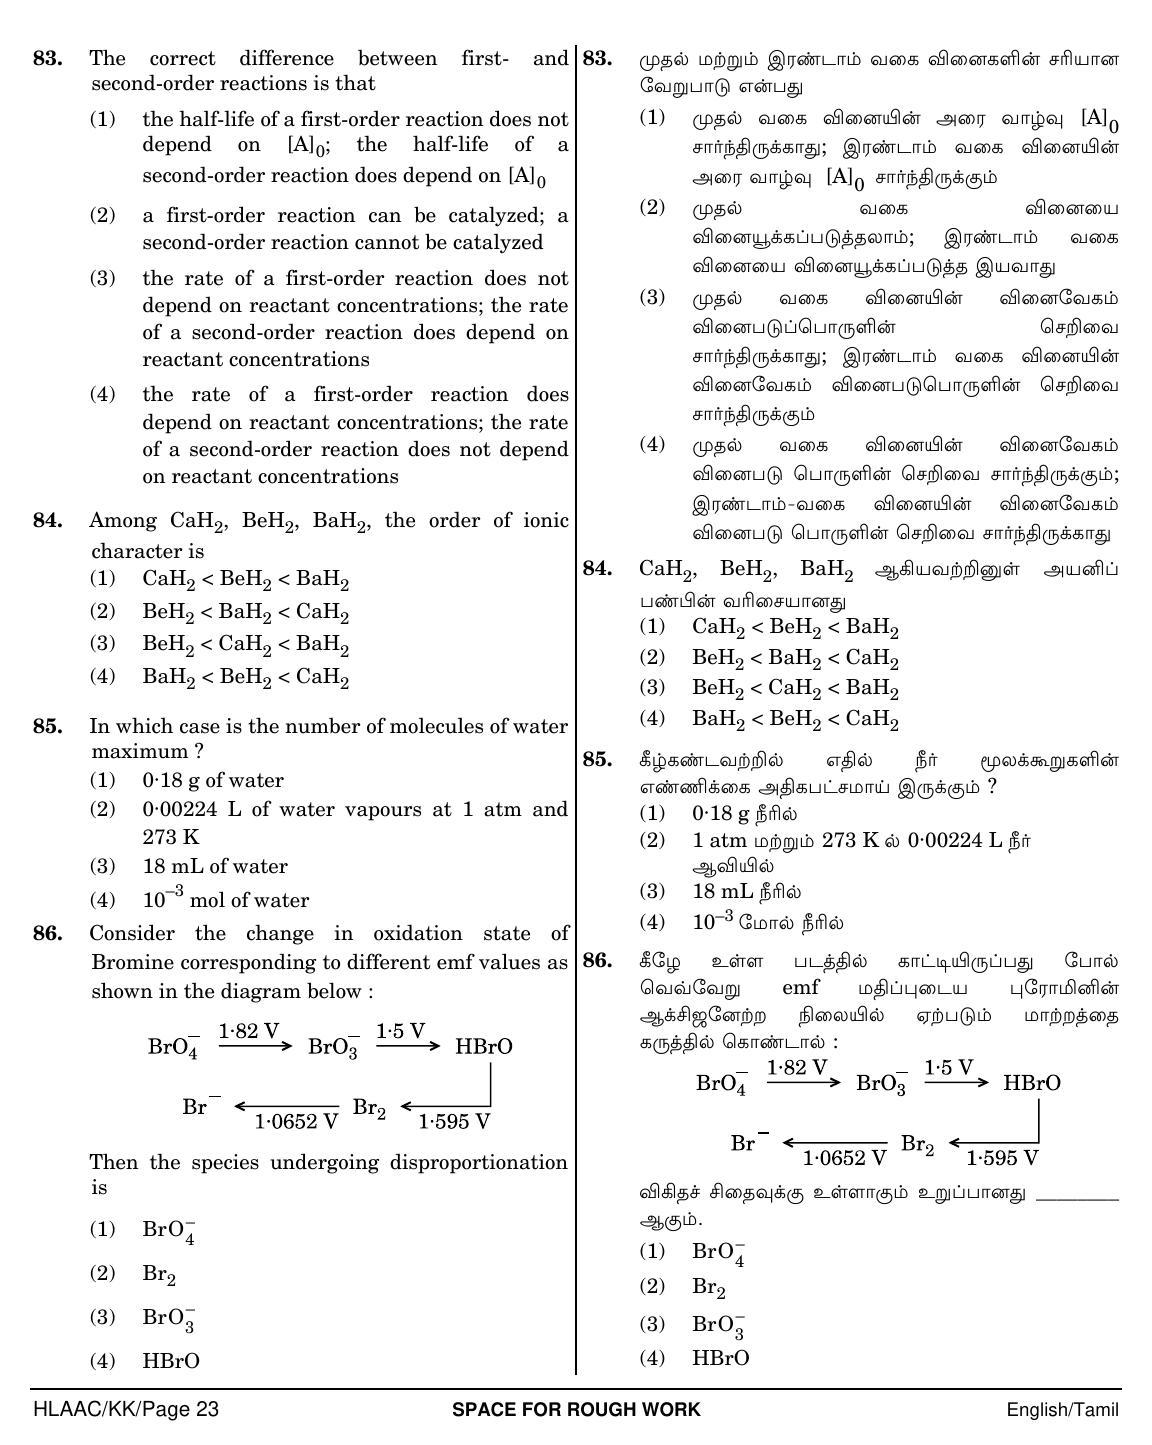 NEET Tamil KK 2018 Question Paper - Page 23